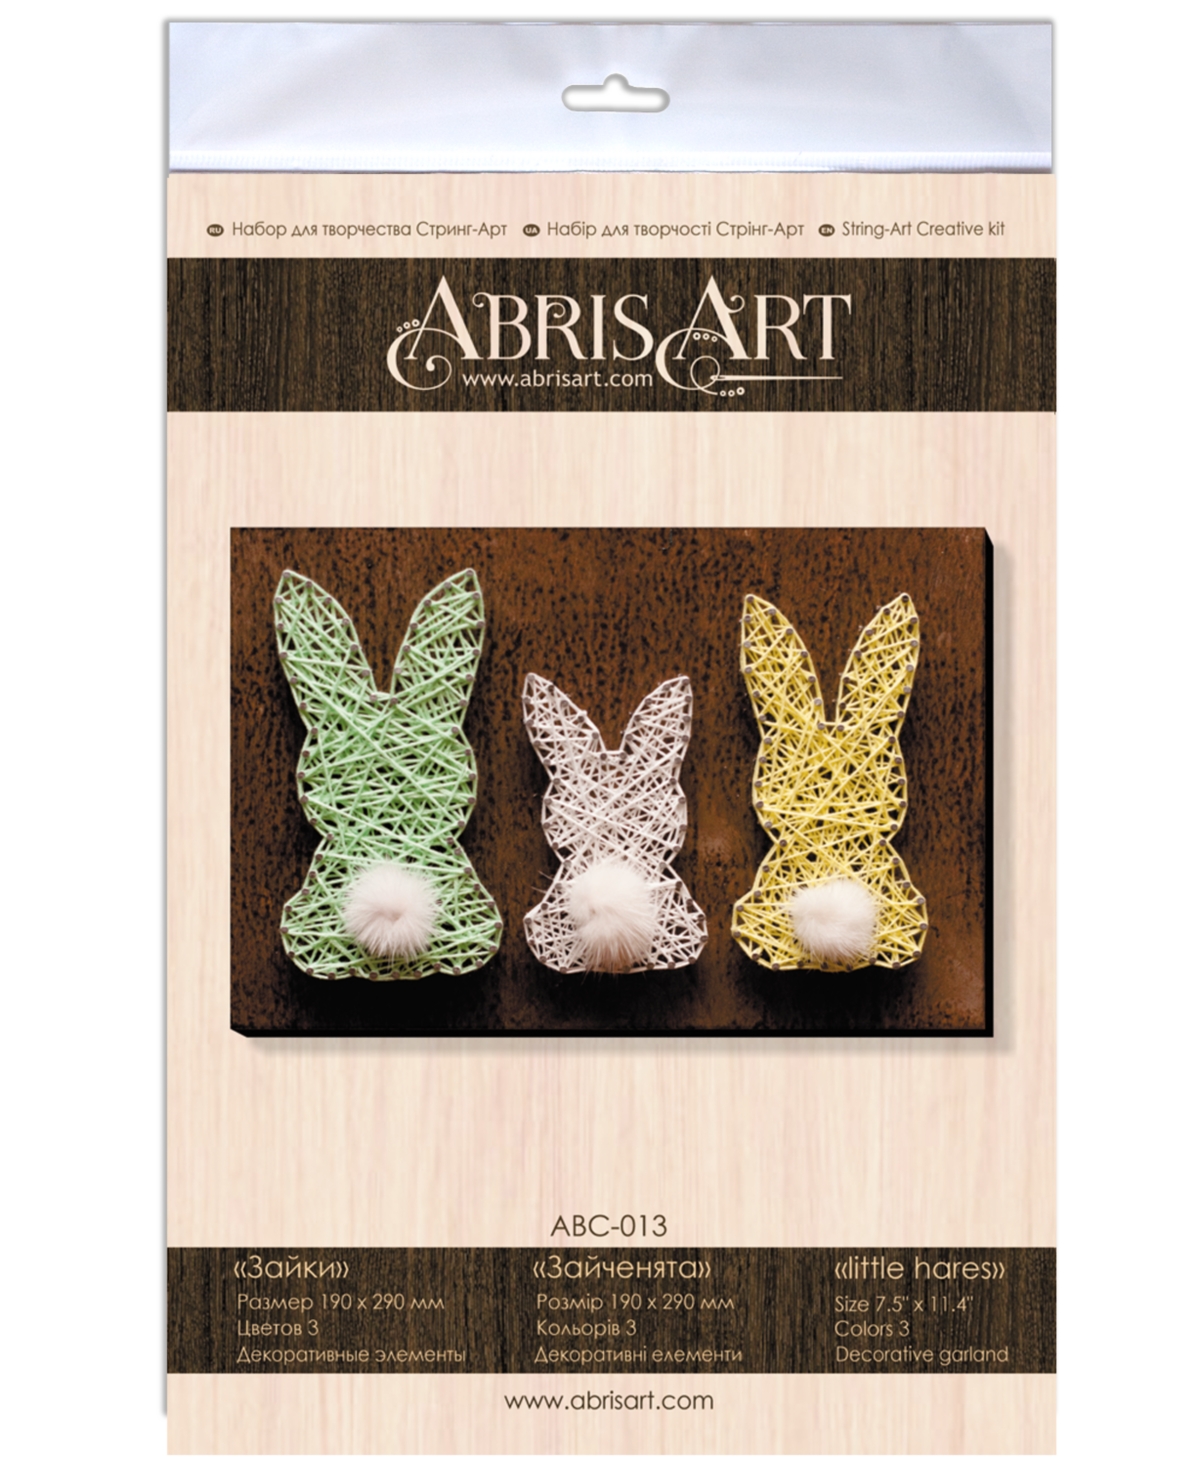 Creative Cross Stitch Kit/String Art Little hares - Assorted Pre-pack (See Table